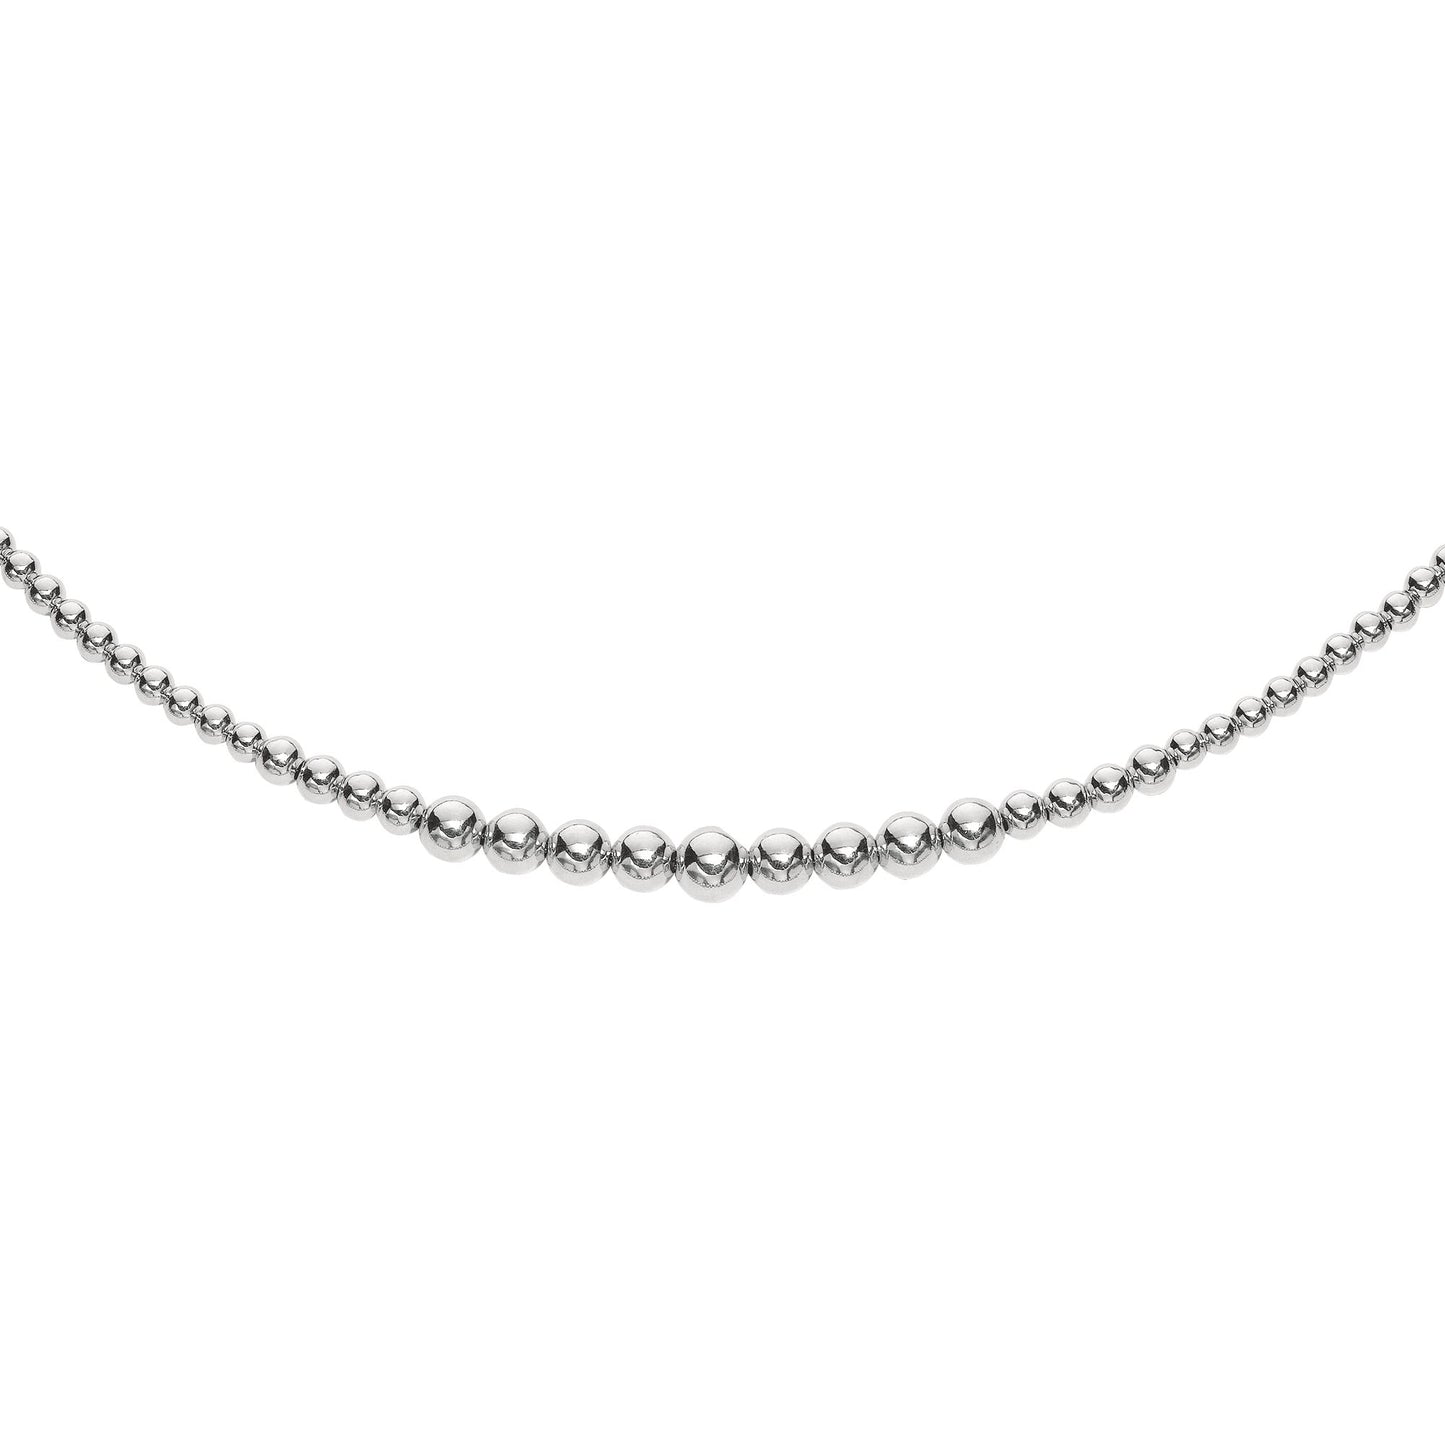 Sterling Silver Polished Graduated 5mm to 8mm Bead Necklace